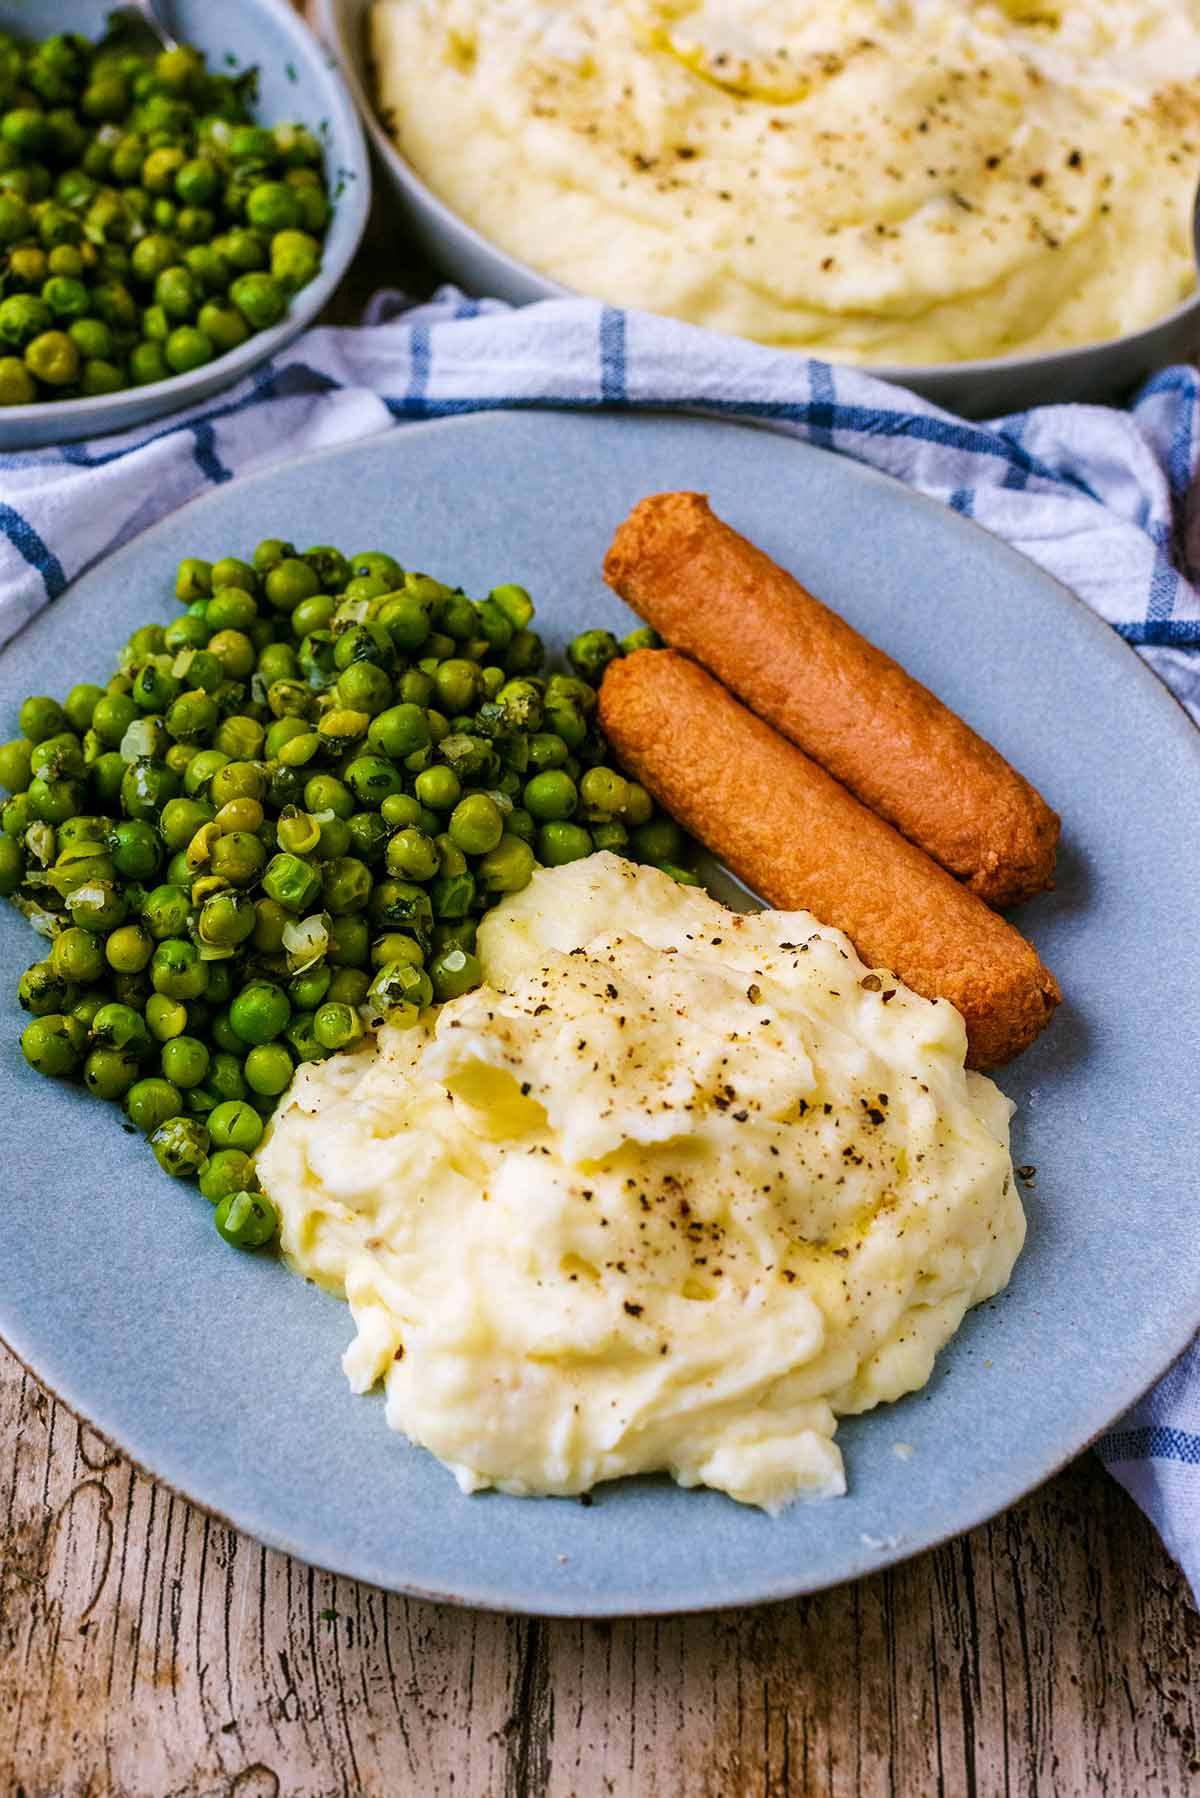 A plate of sausages, peas and mashed potatoes.